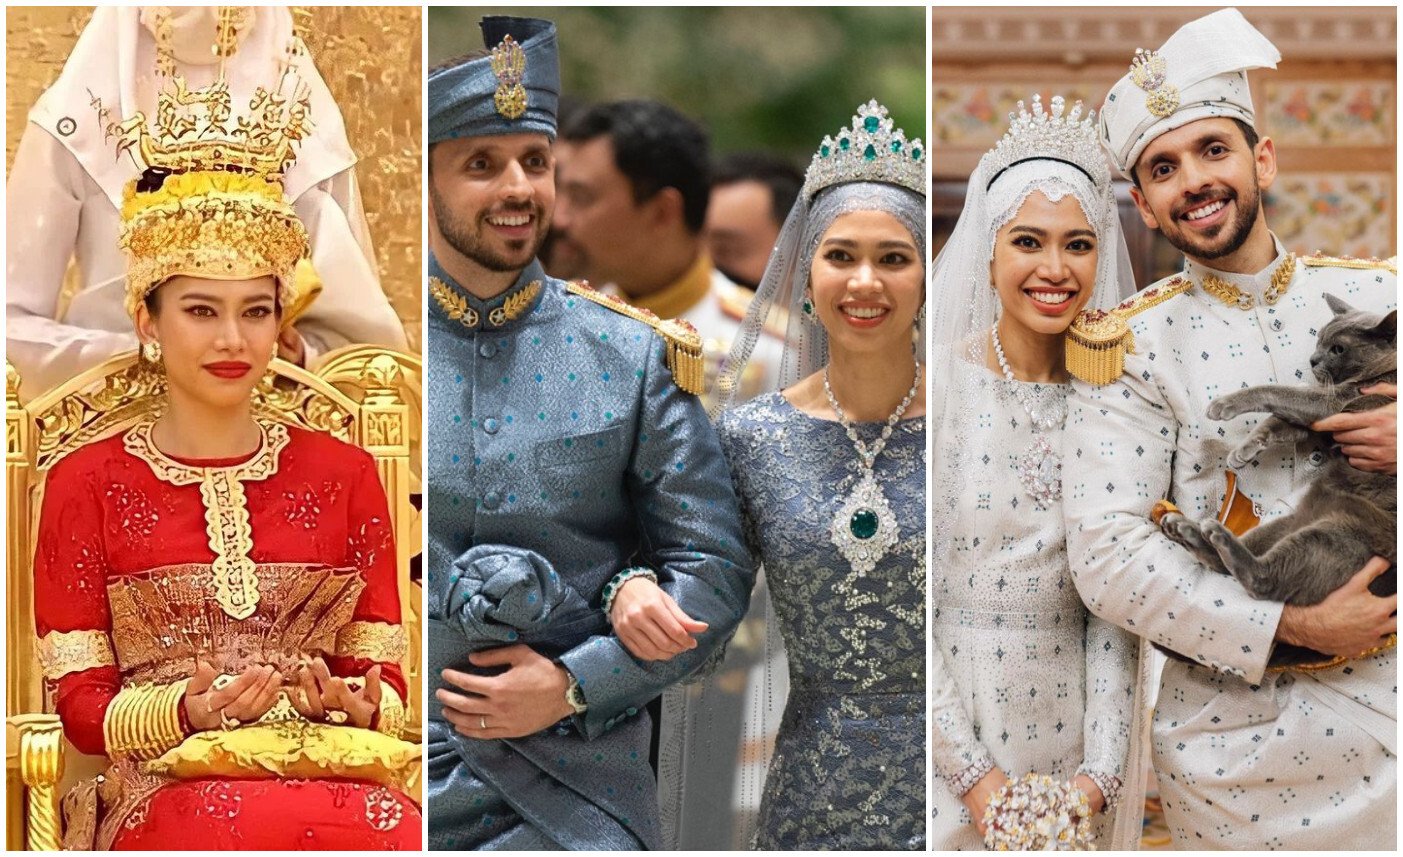 Feast your eyes on these outfits from Princess Fadzilah’s recent wedding. Photos: @support.anishaik, @rudolfportillo, @muash.portfolio/ Instagram